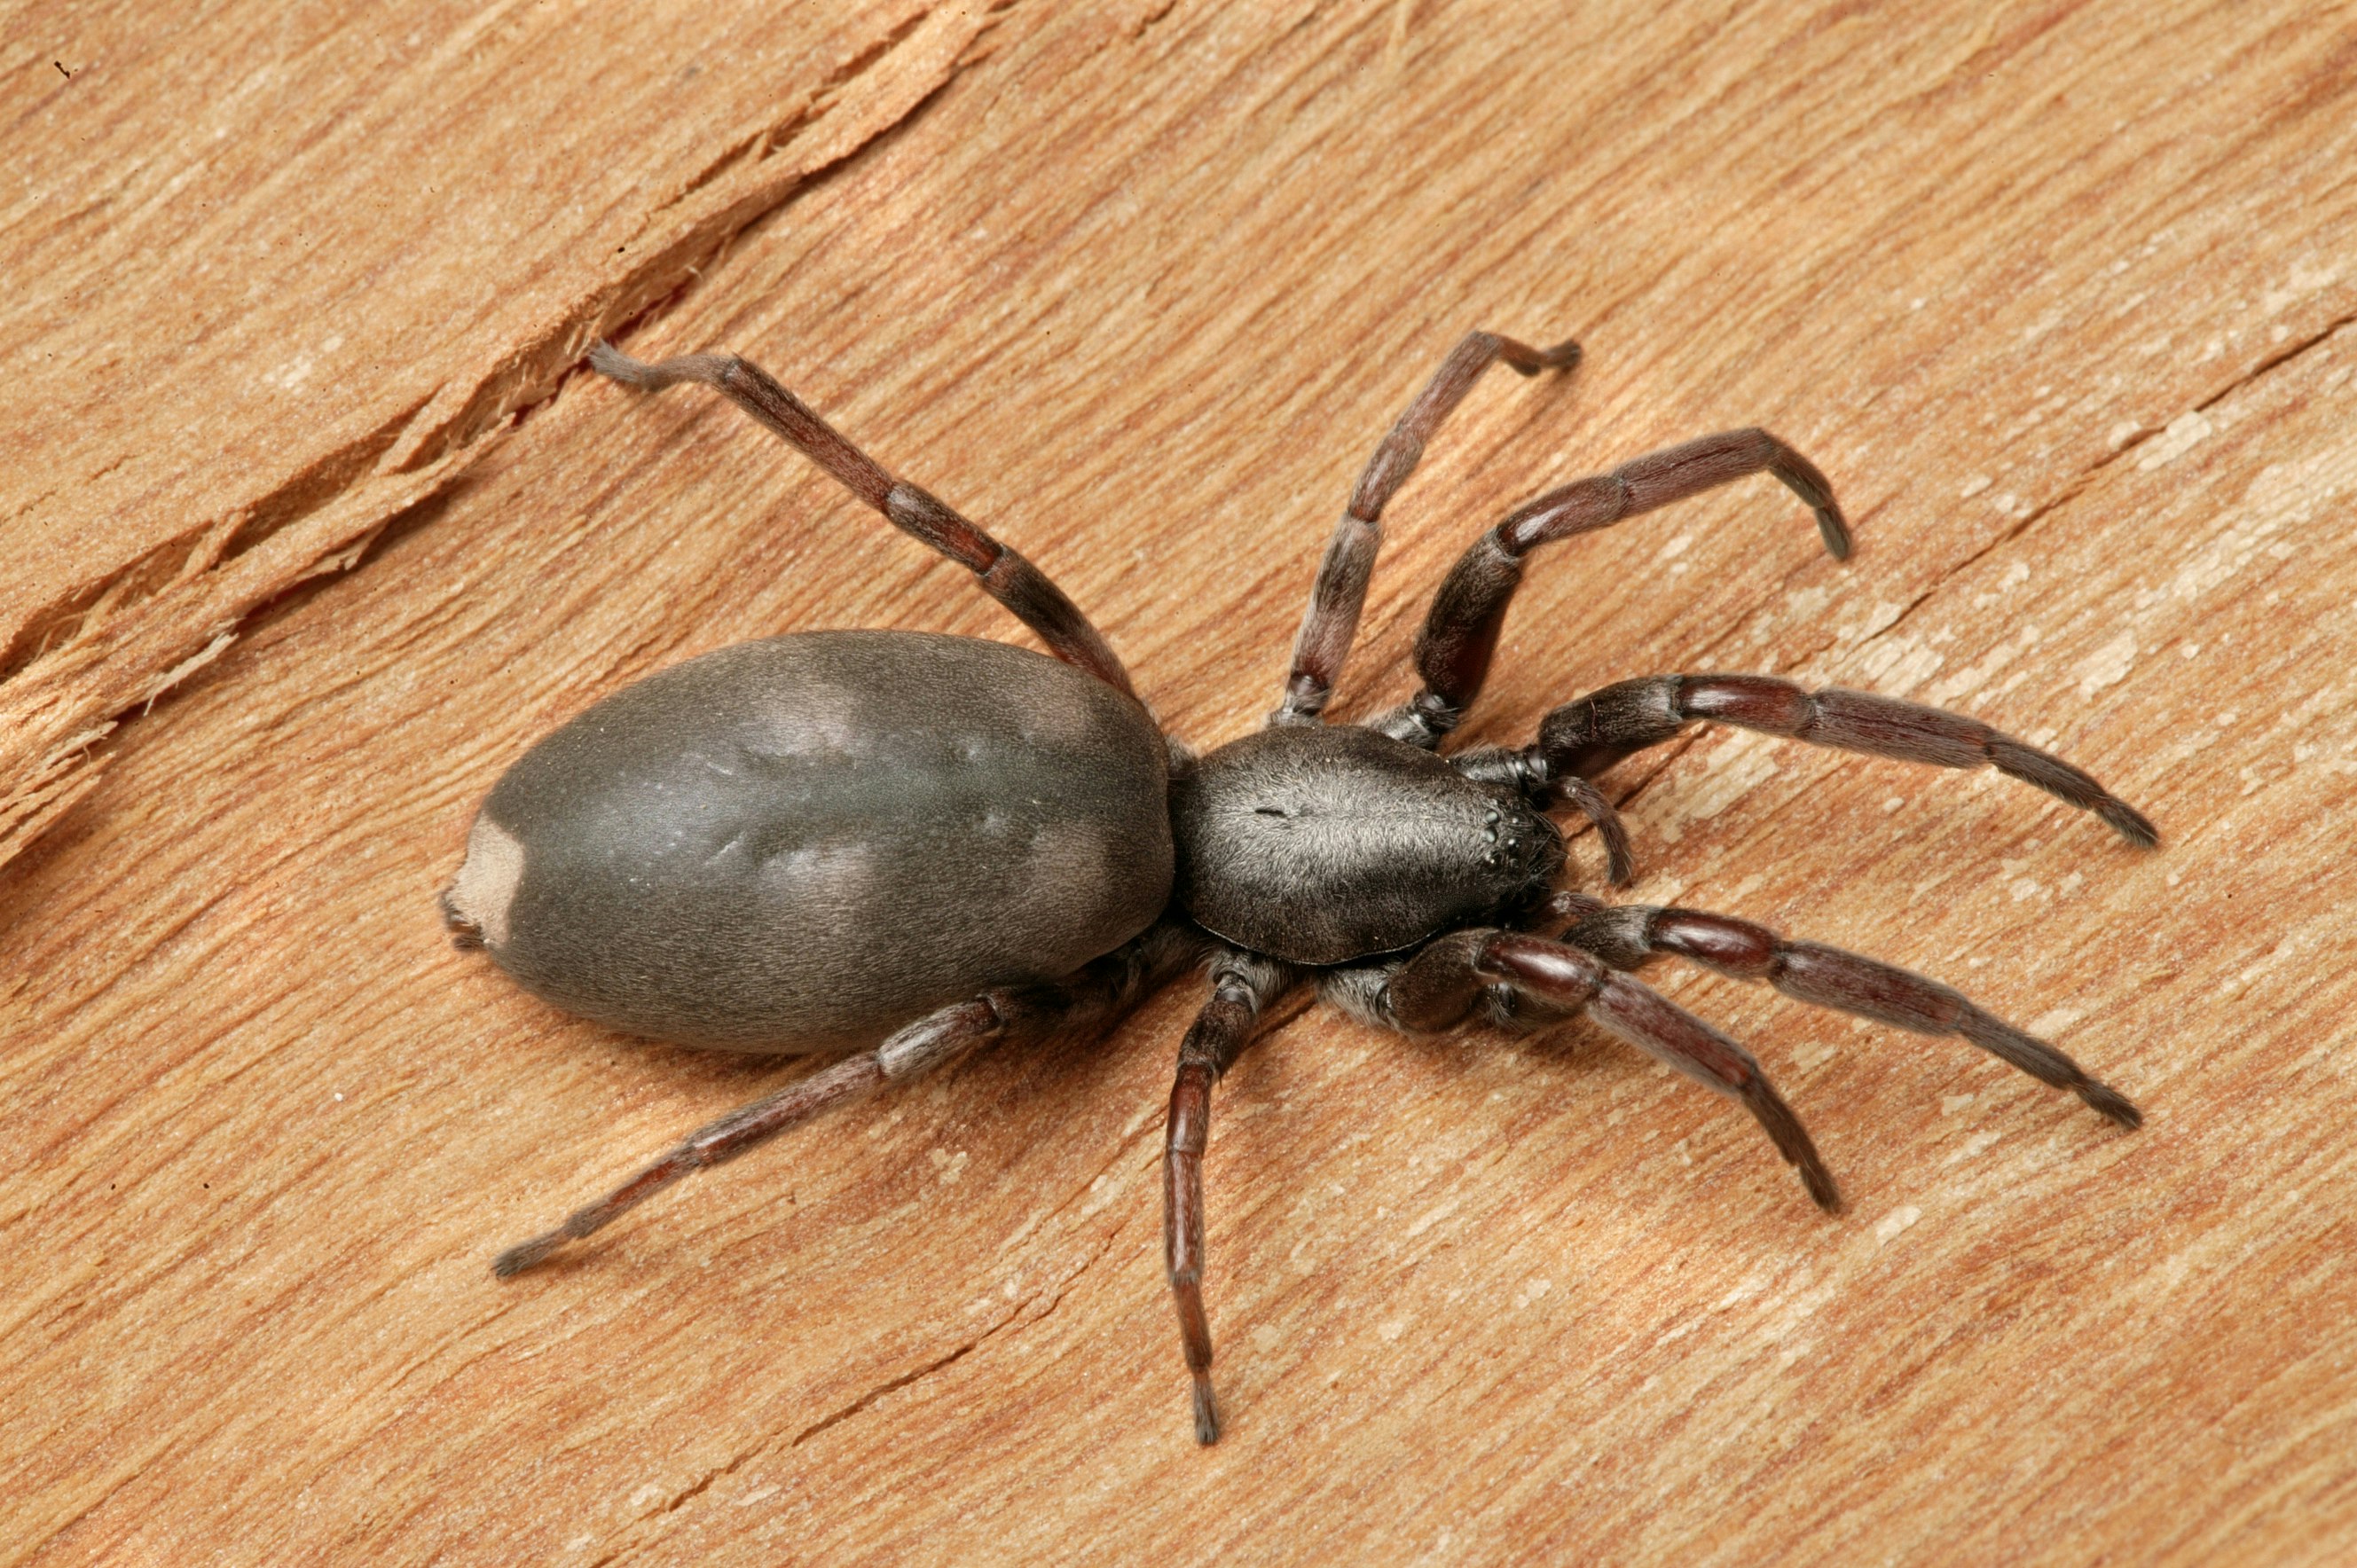 A spider with a large body and a white spot on its tail sitting on a piece of wood